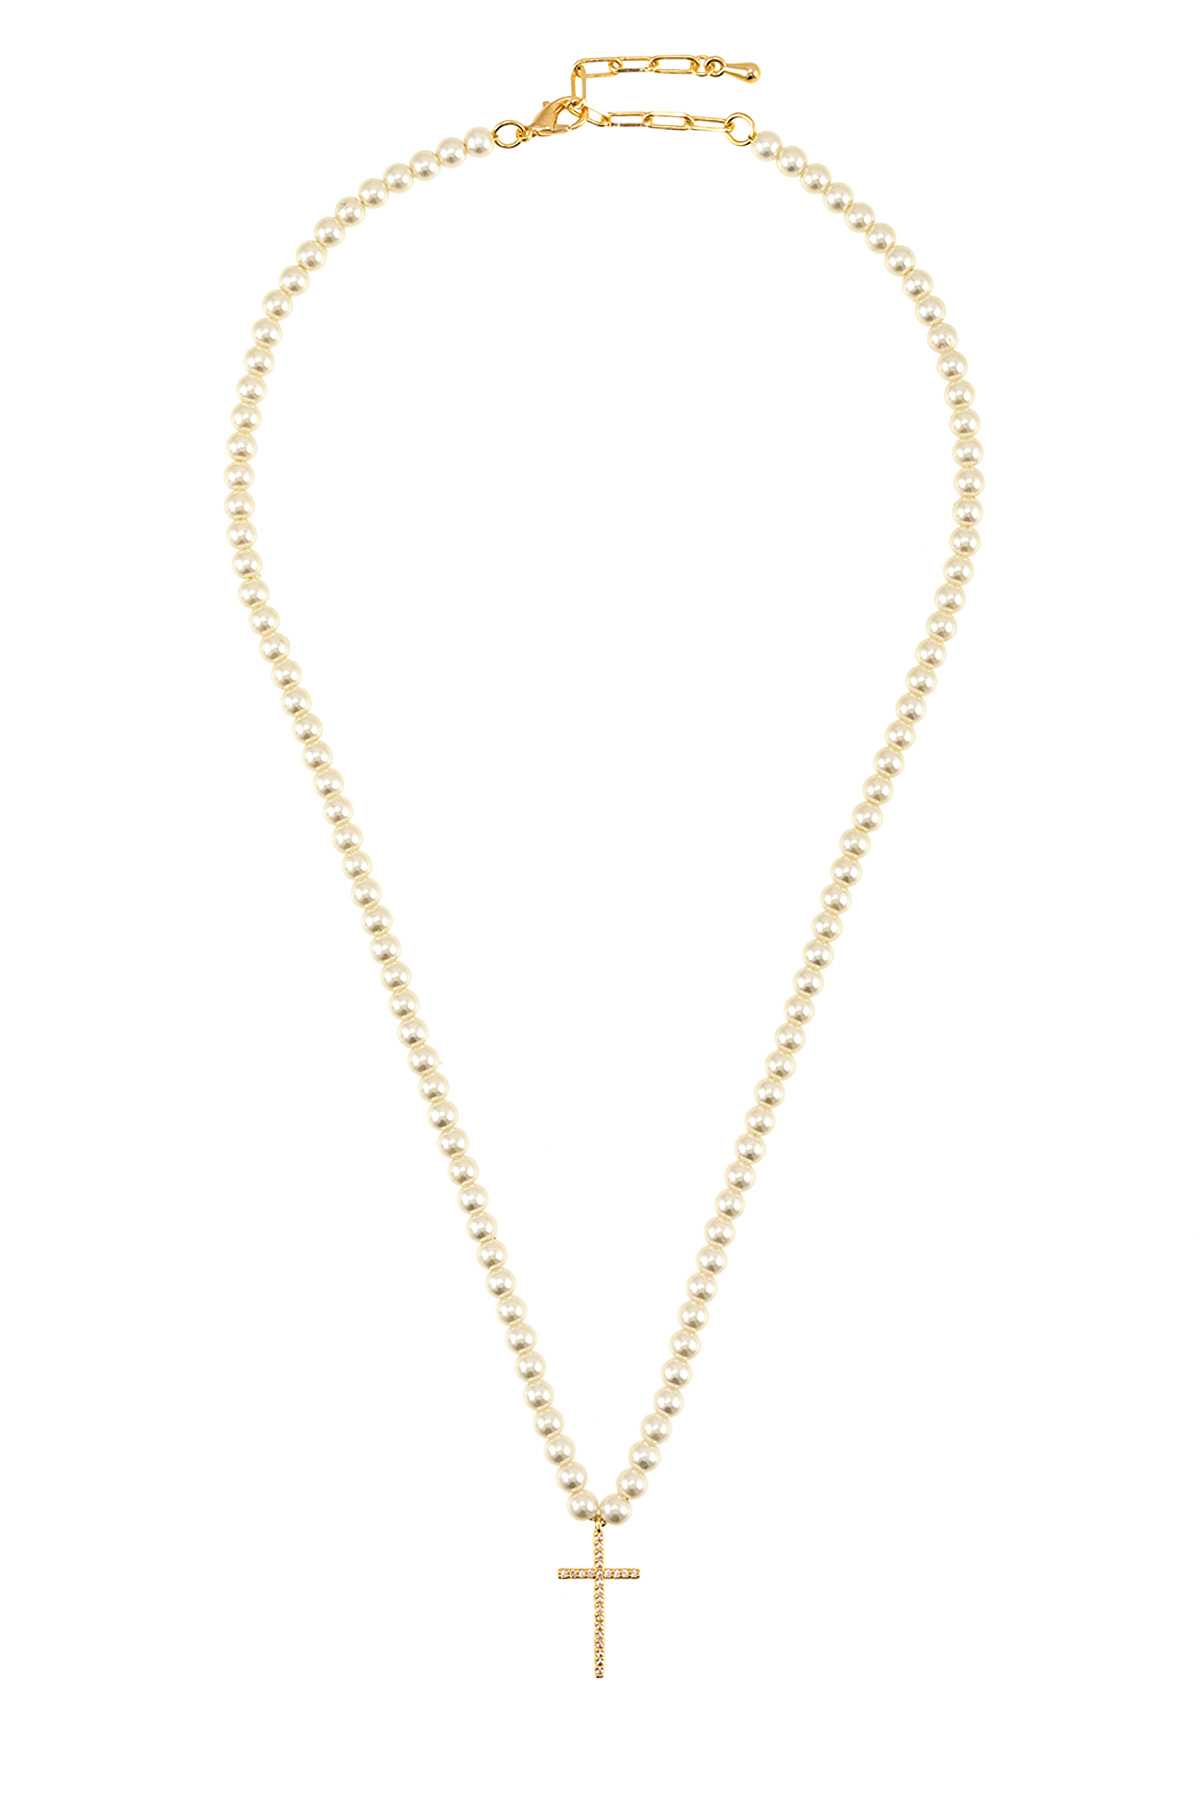 Gold Dipped Pearl Necklace with Cross Charm